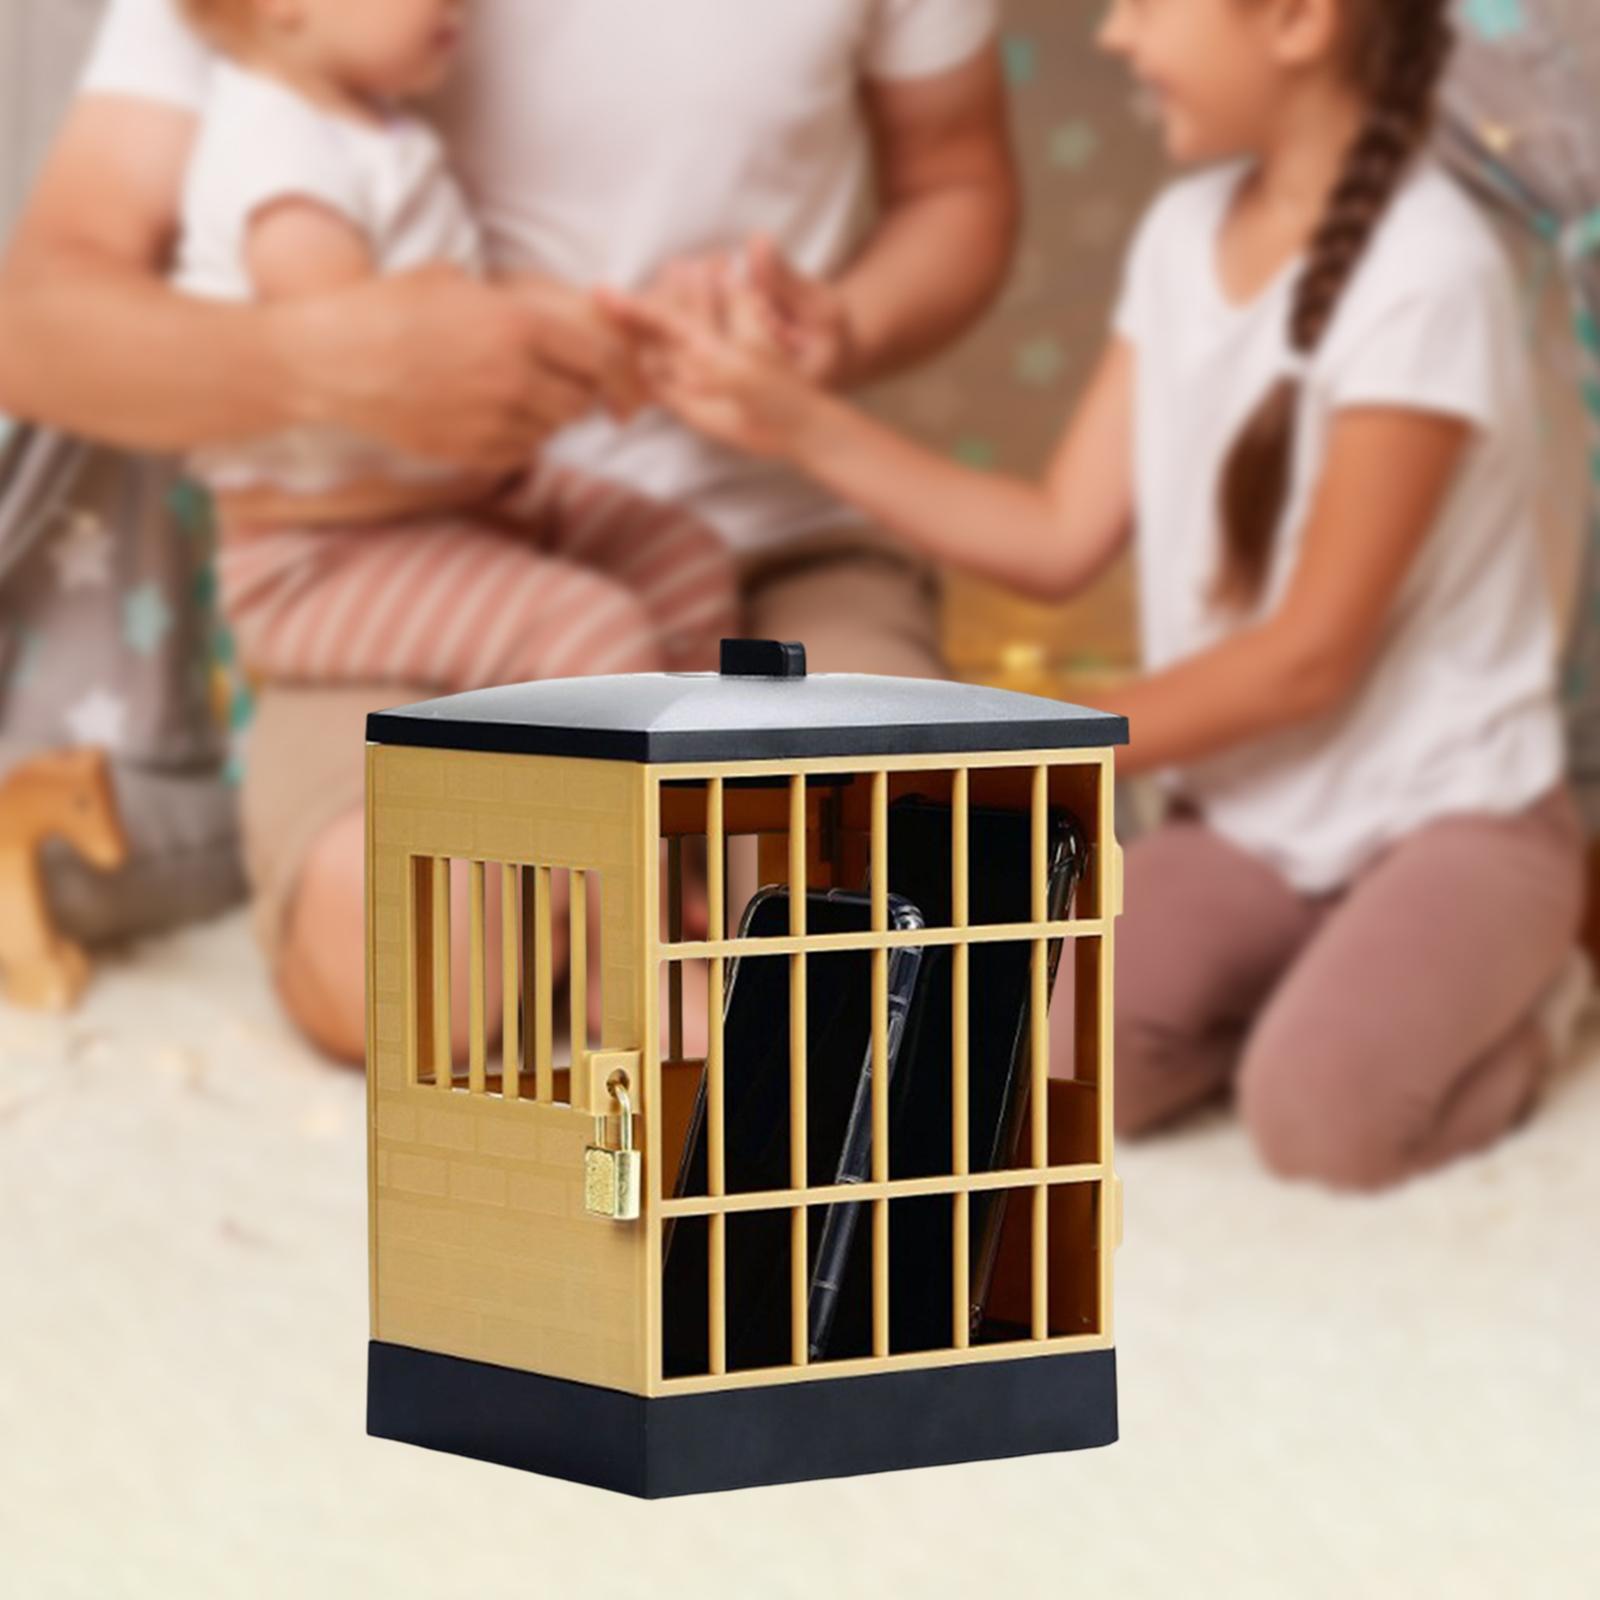 Phone Lock Box Jail Prison Gift Gadget Novelty for Cell Phones Kids Adults